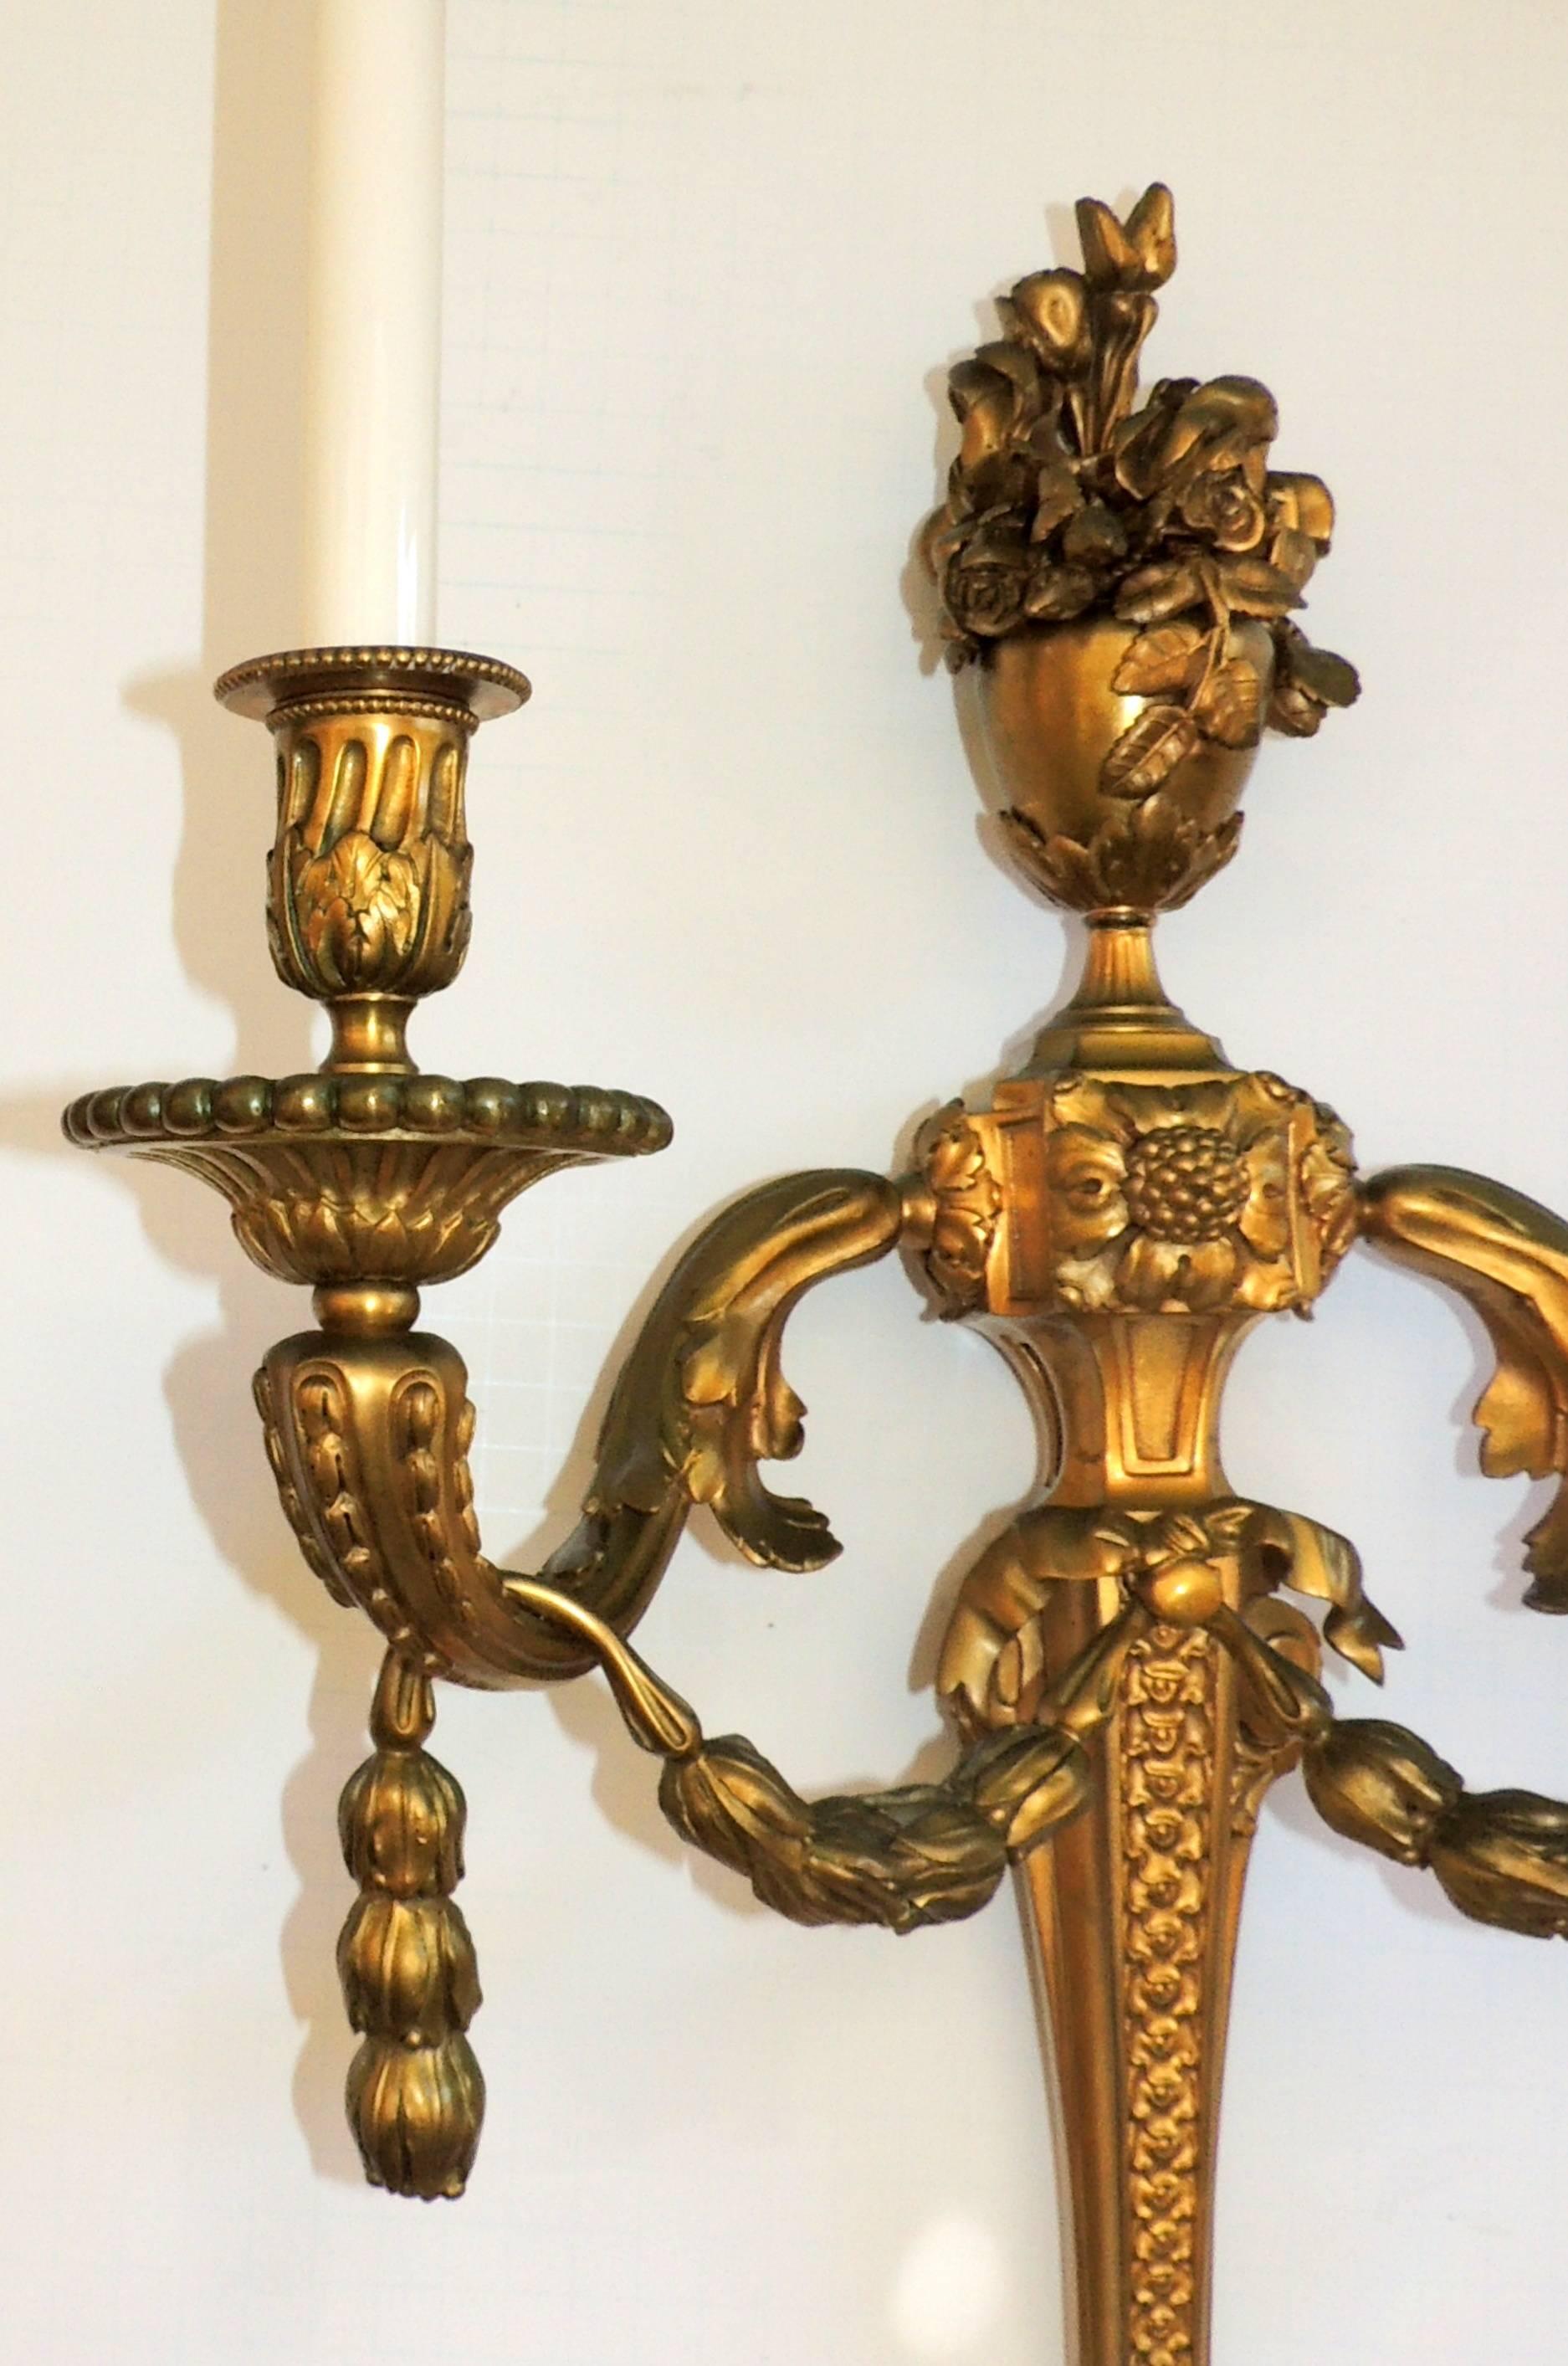 Early 20th Century Wonderful French Pair Two-Arm Gilt Dore Bronze Urn Floral Garland Swag Sconces